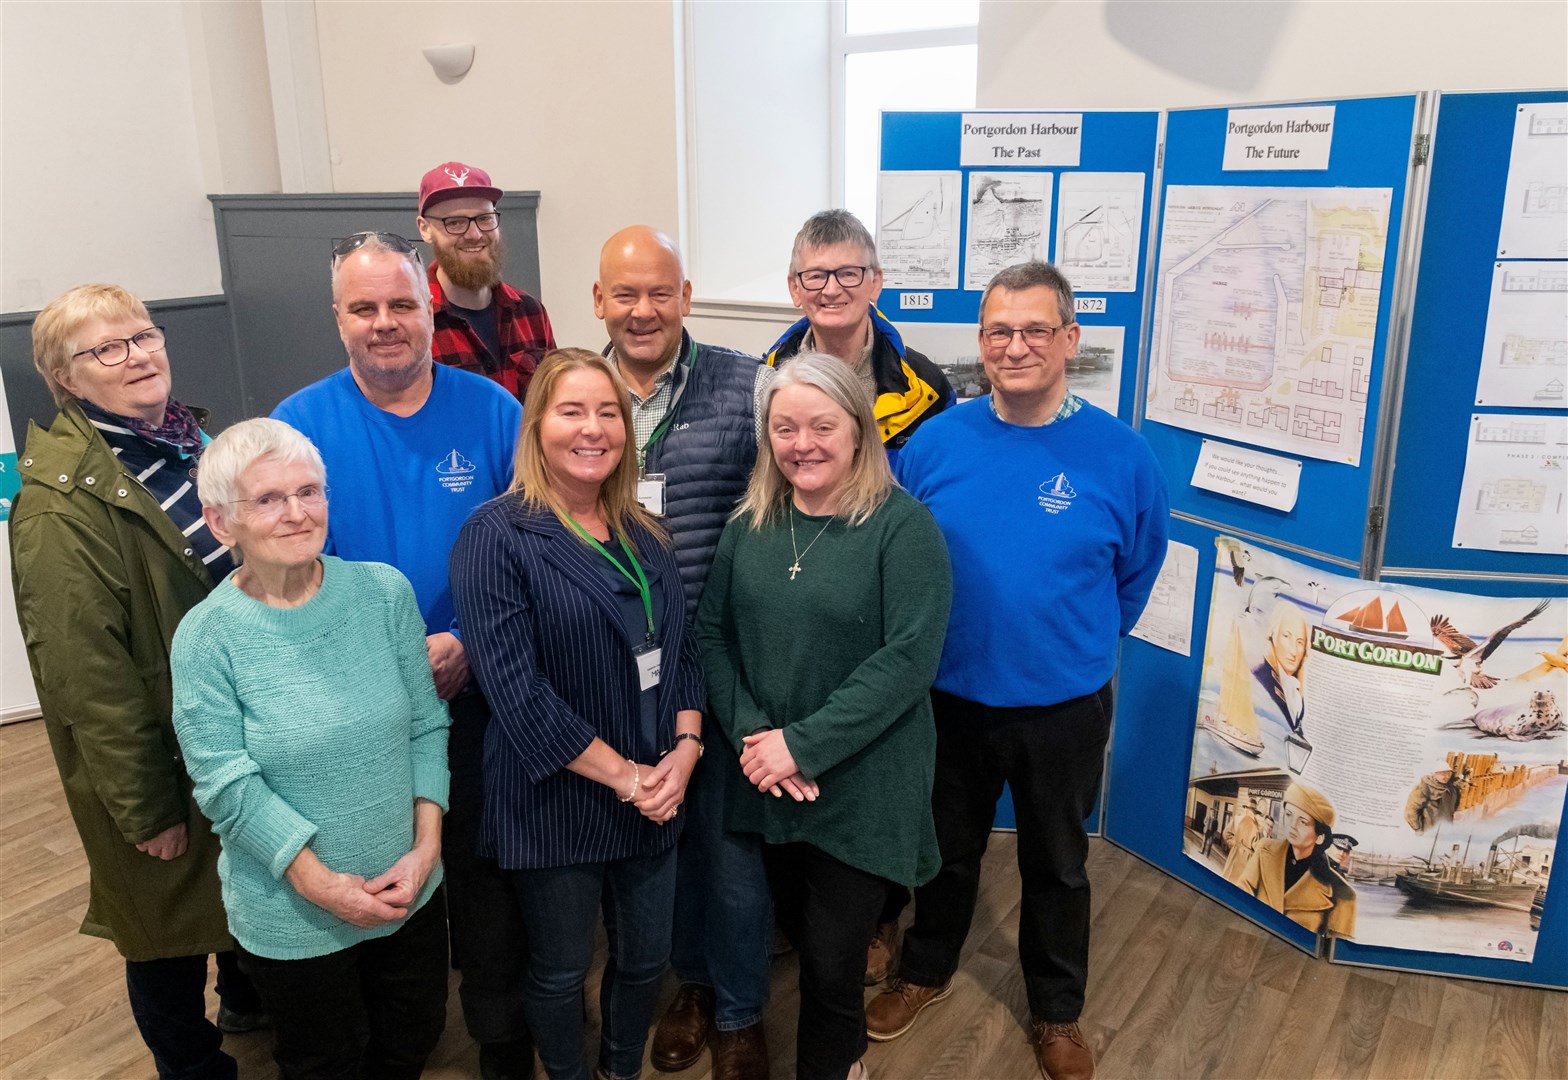 Members of the Portgordon Community Trust join Leeanne Lowden and Mark Kummerer from MKA Economics at the Shaping Our Future Community Drop-in session at the village hall in Portgordon. Picture: Beth Taylor